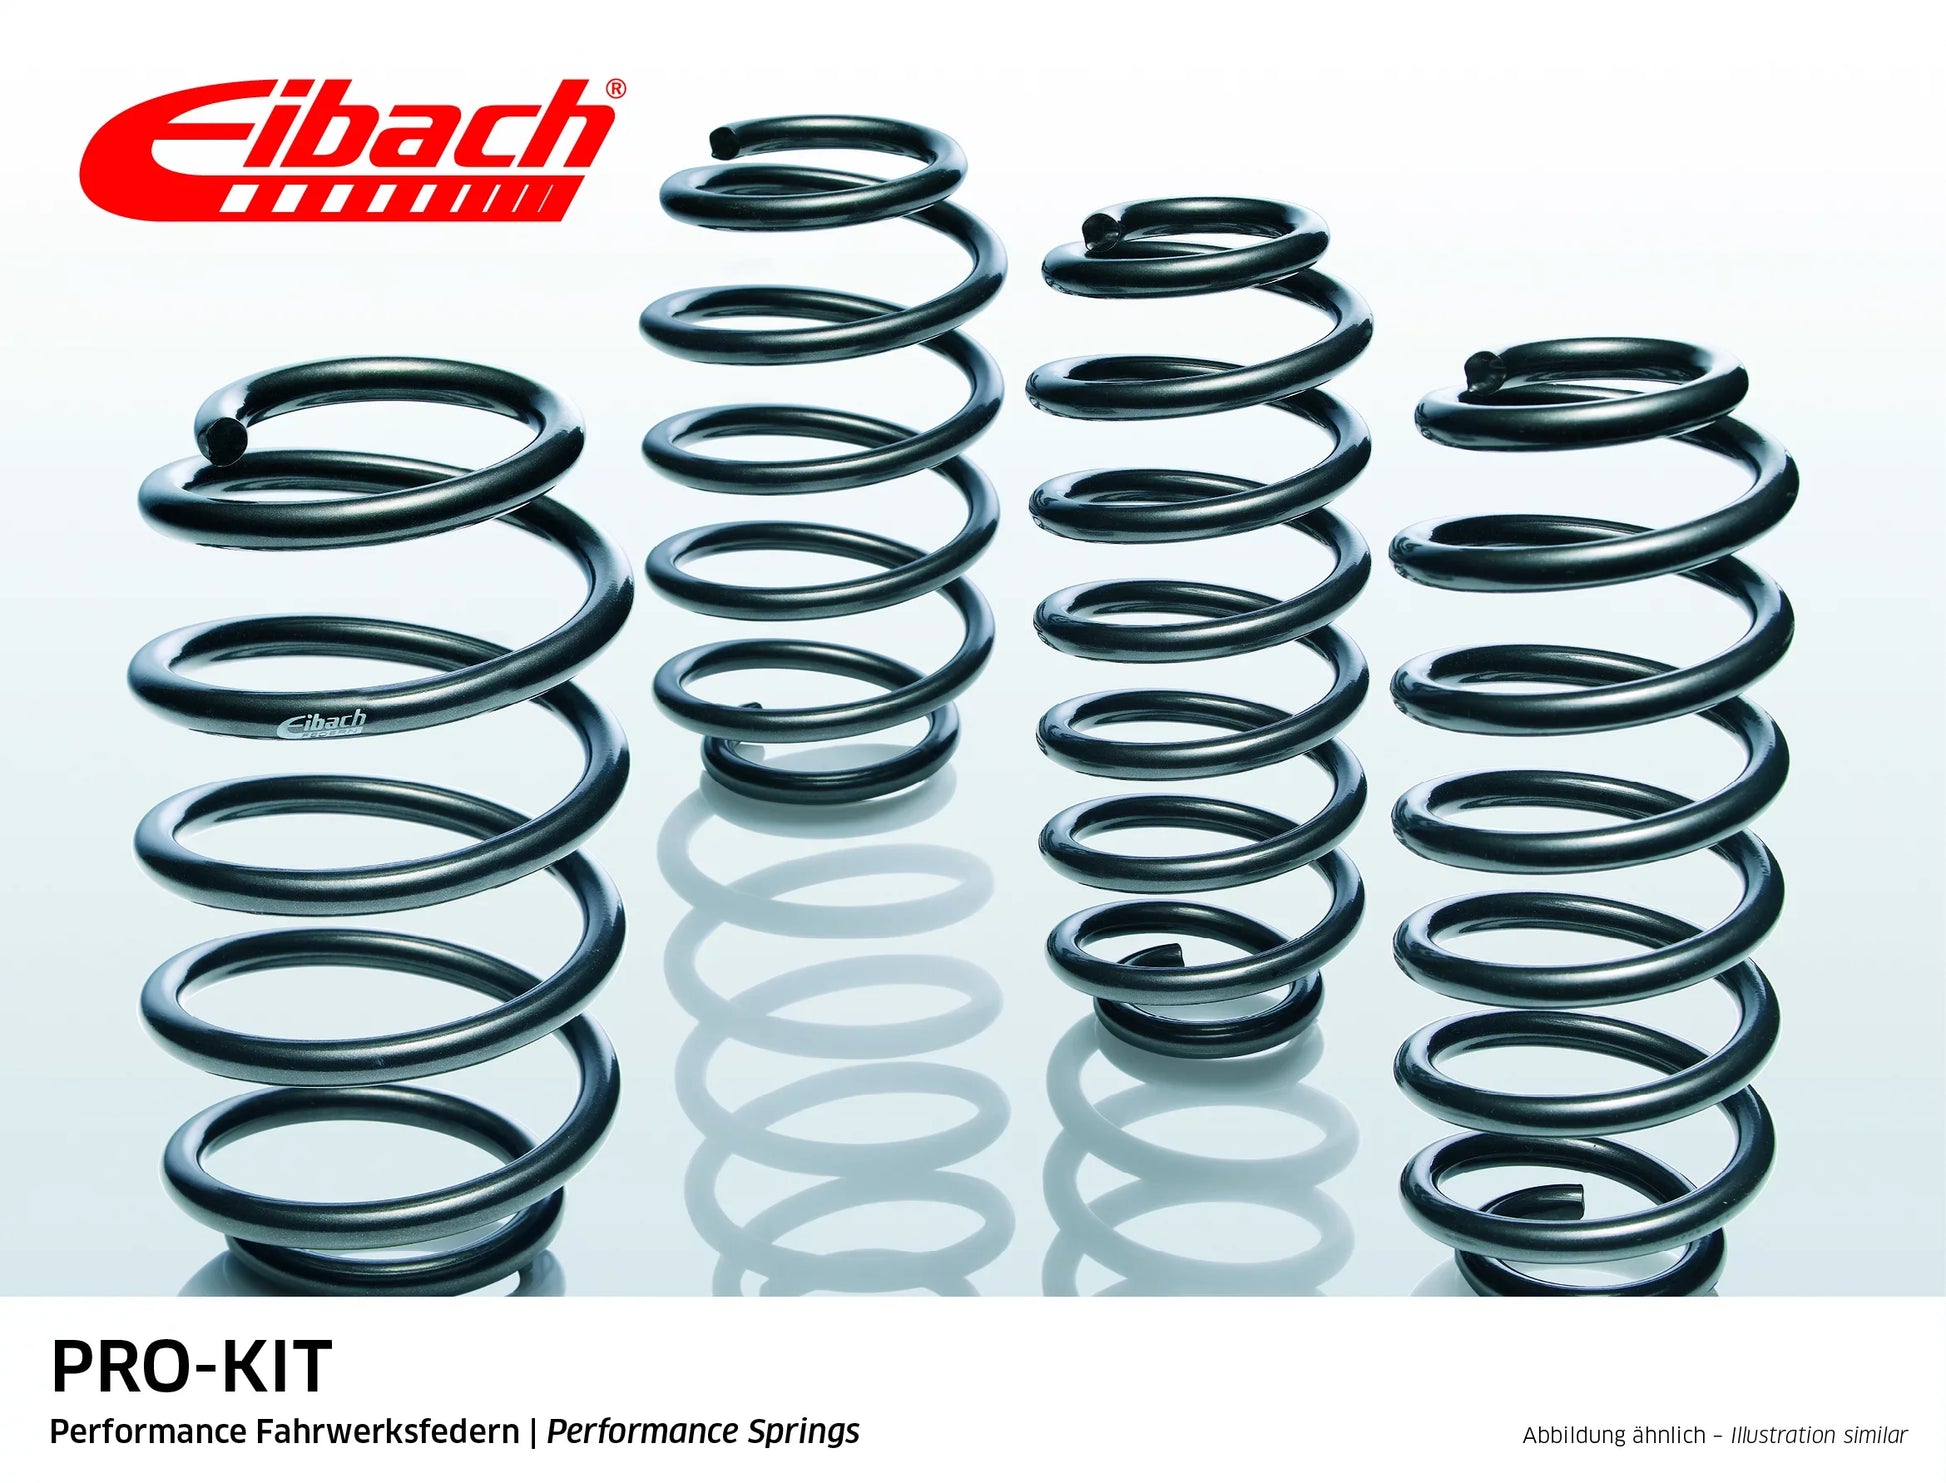 Eibach Pro-Kit Lowering Springs (E10-15-007-10-22) at £235.25